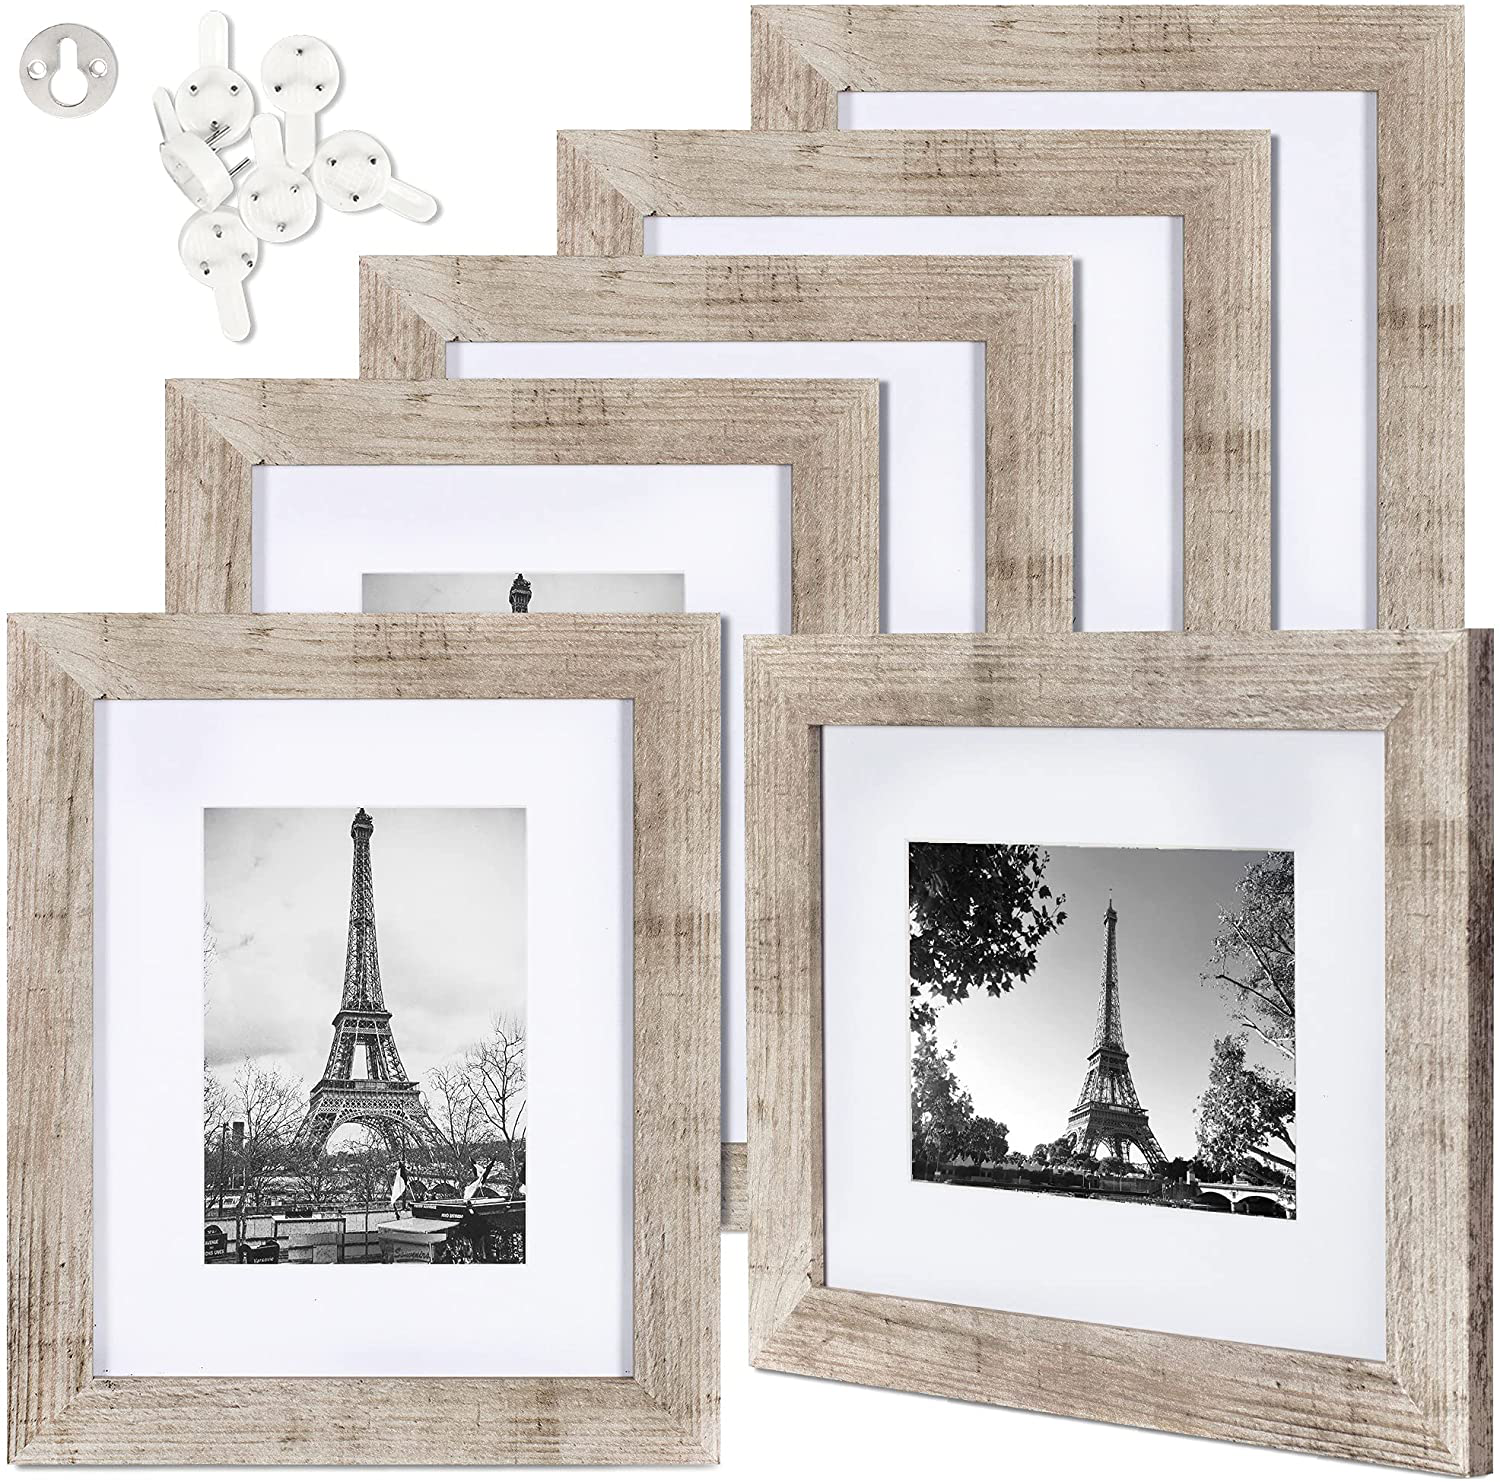 upsimples 8x10 Picture Frame Distressed Brown with Real Glass,Display Pictures 5x7 with Mat or 8x10 Without Mat,Multi Photo Frames Collage for Wall or Tabletop Display,Set of 6